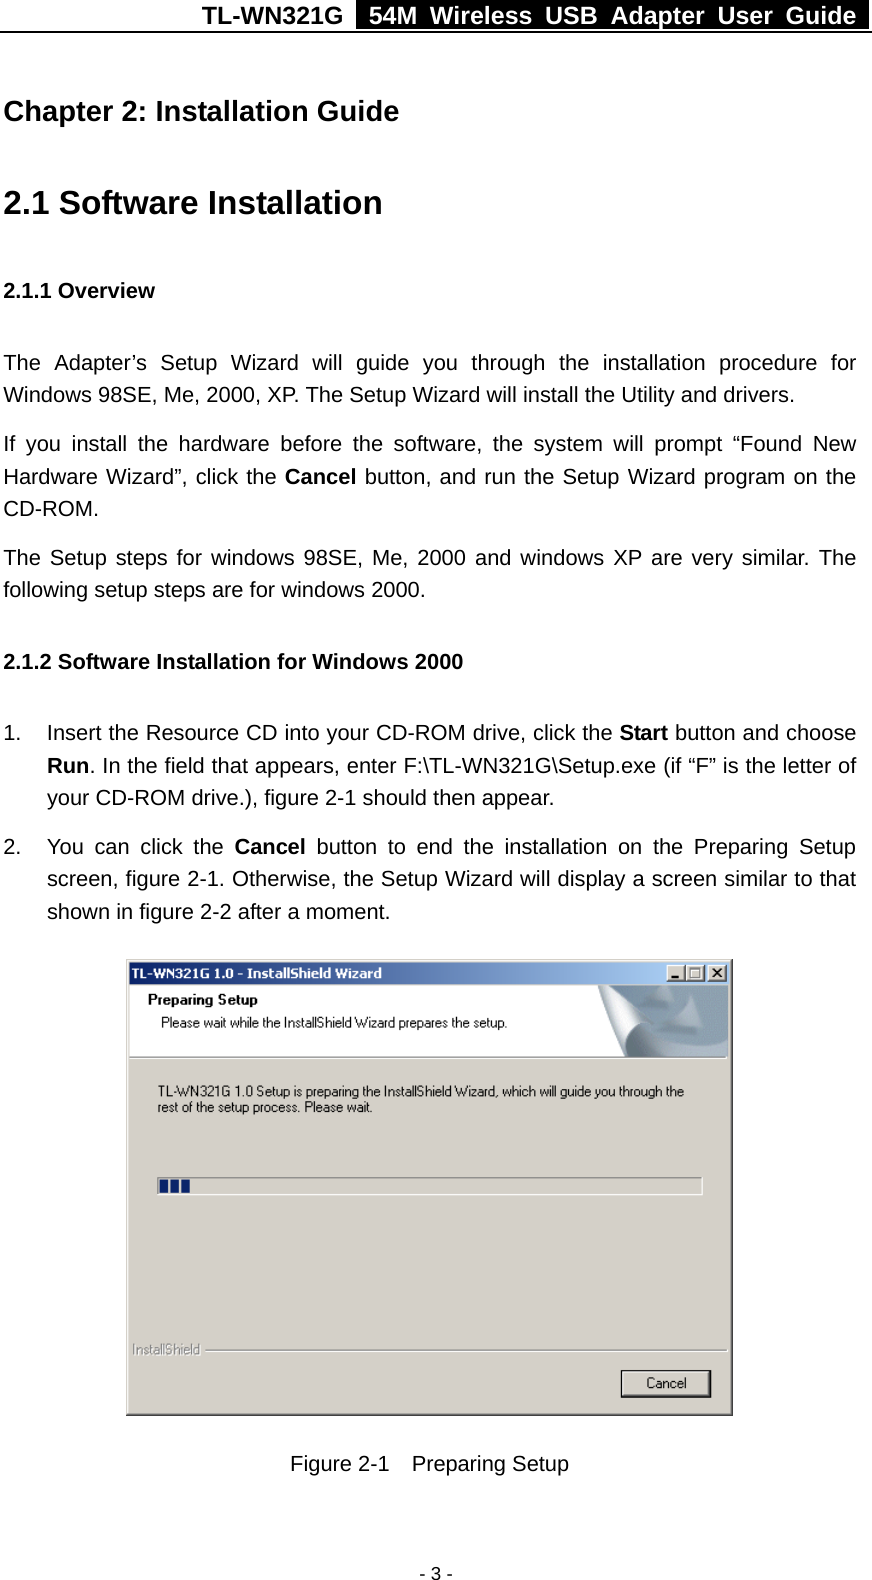 TL-WN321G   54M Wireless USB Adapter User Guide  Chapter 2: Installation Guide 2.1 Software Installation 2.1.1 Overview The Adapter’s Setup Wizard will guide you through the installation procedure for Windows 98SE, Me, 2000, XP. The Setup Wizard will install the Utility and drivers. If you install the hardware before the software, the system will prompt “Found New Hardware Wizard”, click the Cancel button, and run the Setup Wizard program on the CD-ROM.  The Setup steps for windows 98SE, Me, 2000 and windows XP are very similar. The following setup steps are for windows 2000. 2.1.2 Software Installation for Windows 2000 1.  Insert the Resource CD into your CD-ROM drive, click the Start button and choose Run. In the field that appears, enter F:\TL-WN321G\Setup.exe (if “F” is the letter of your CD-ROM drive.), figure 2-1 should then appear.  2.  You can click the Cancel button to end the installation on the Preparing Setup screen, figure 2-1. Otherwise, the Setup Wizard will display a screen similar to that shown in figure 2-2 after a moment.  Figure 2-1  Preparing Setup - 3 -